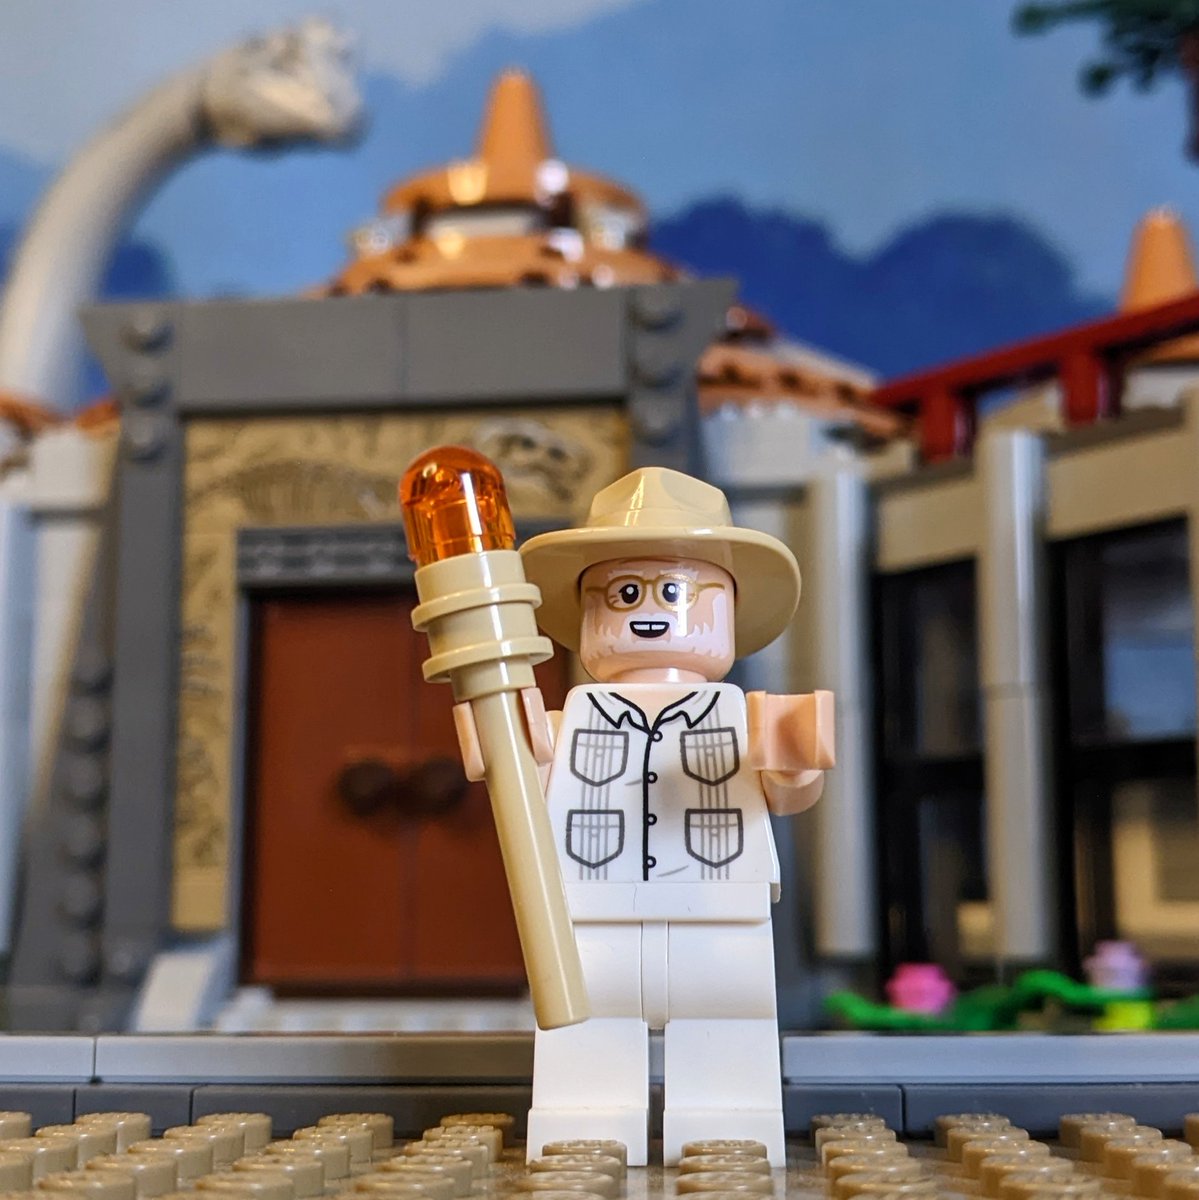 The final #LEGO #JurassicPark minifigure diorama to complete the set - the man that started it all, John Hammond! @JurassicWorld @LEGO_Group